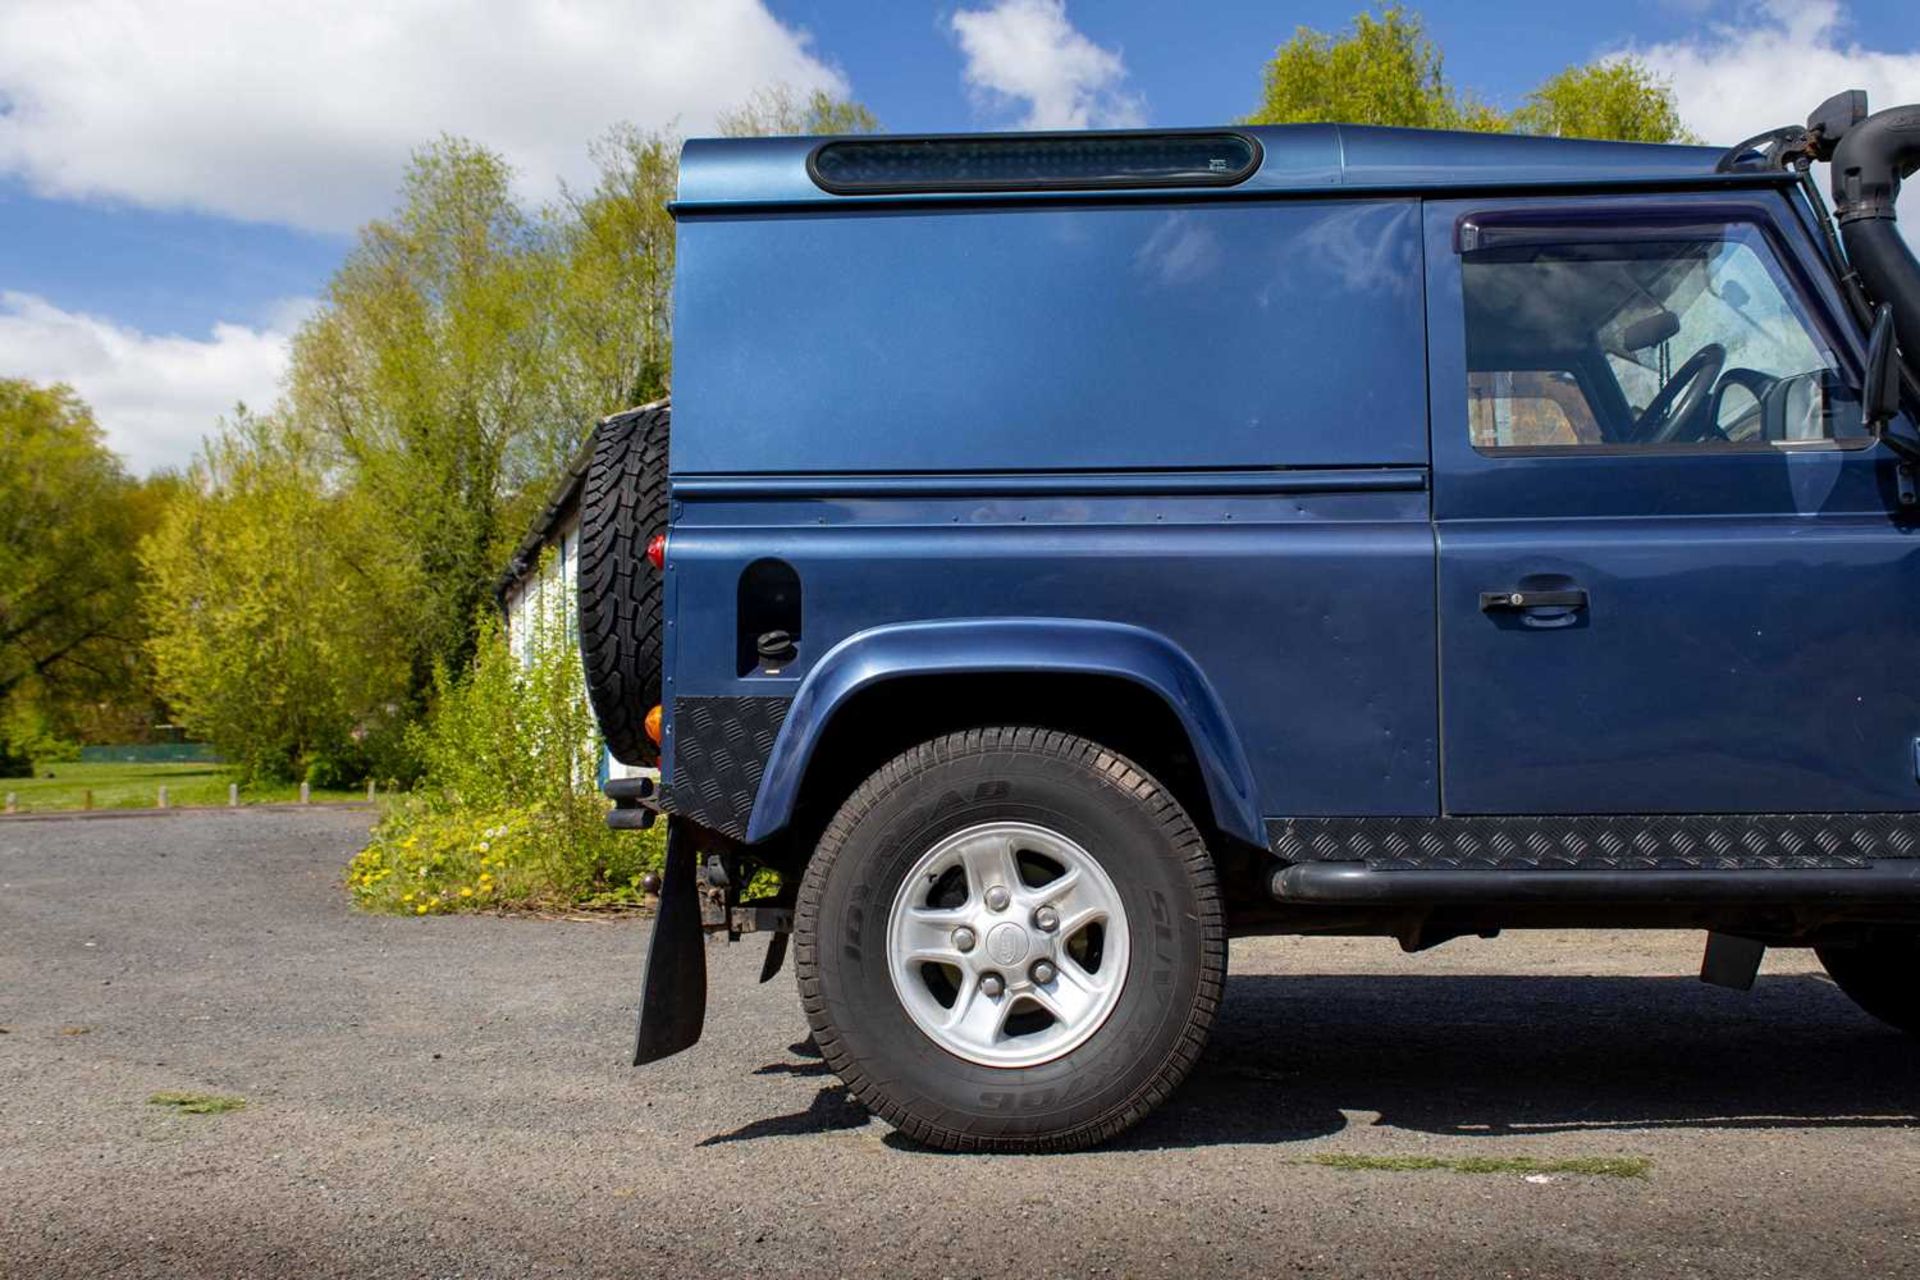 2007 Land Rover Defender 90 County  Powered by the 2.4-litre TDCi unit and features numerous tastefu - Image 17 of 76